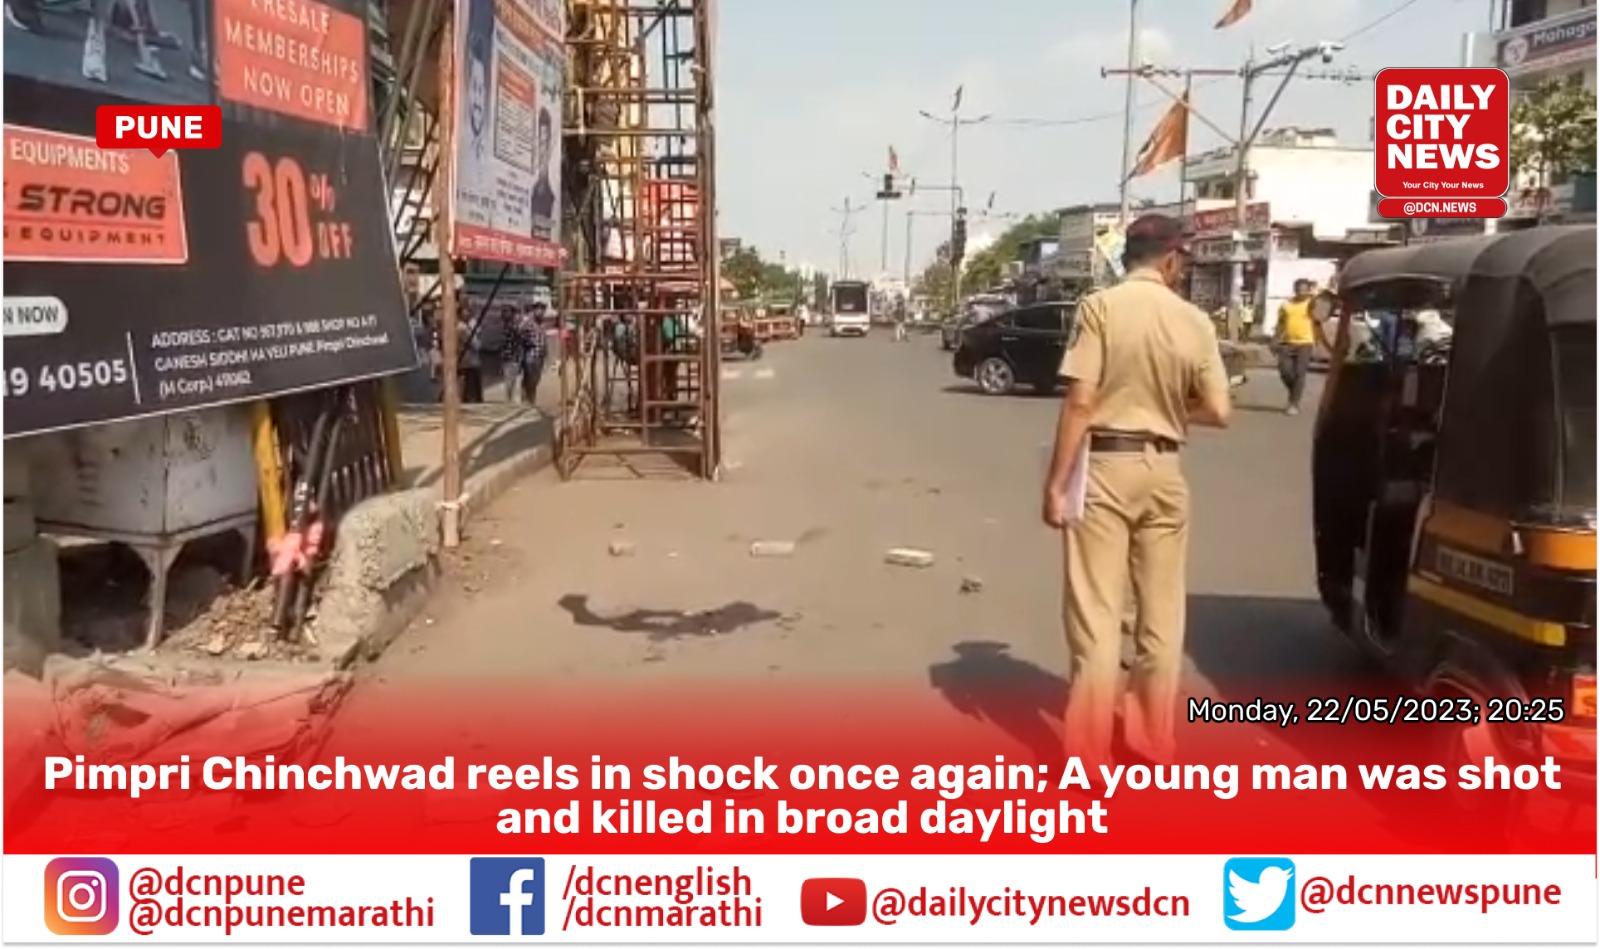 Pimpri Chinchwad reels in shock once again; A young man was shot and killed in broad daylight